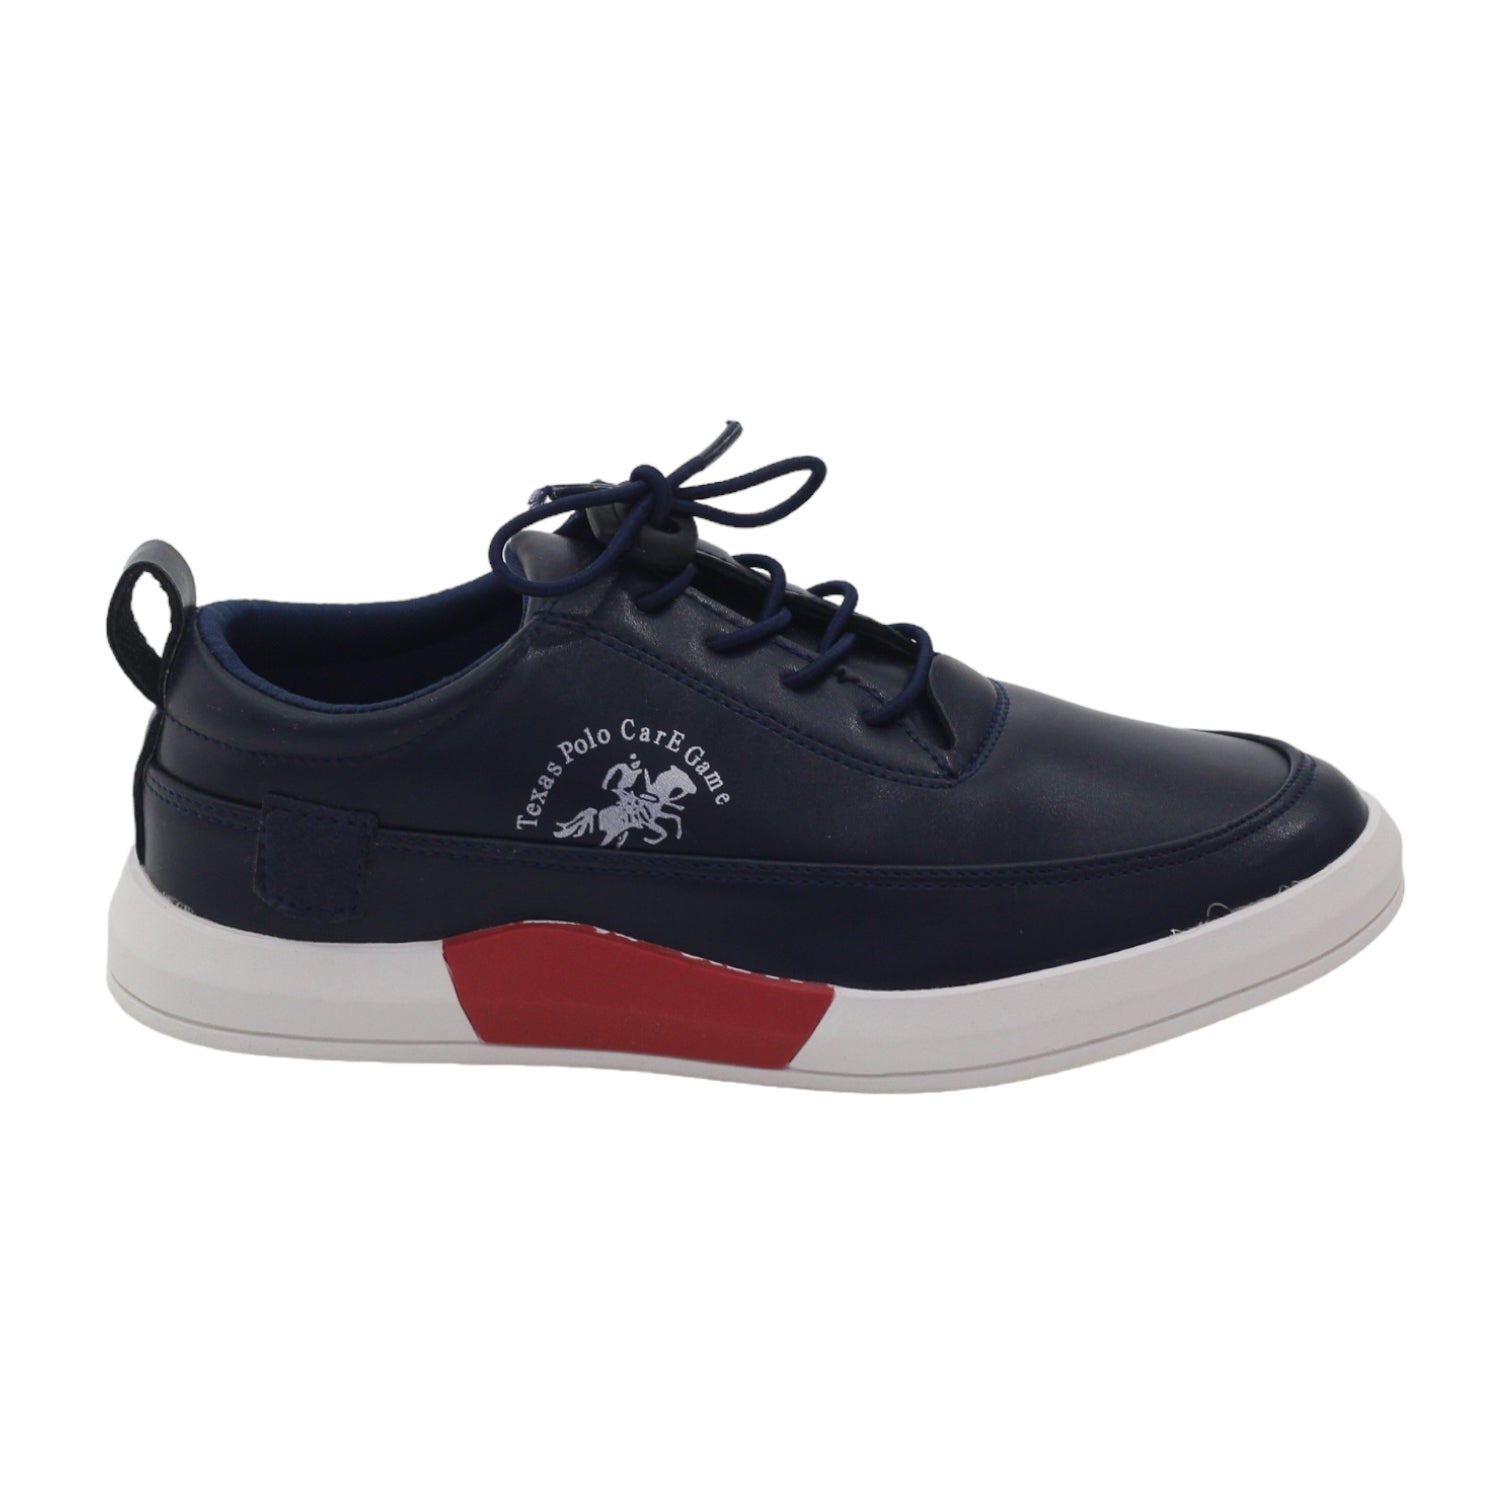 Oliver Boys Lace up B-19 sneaker